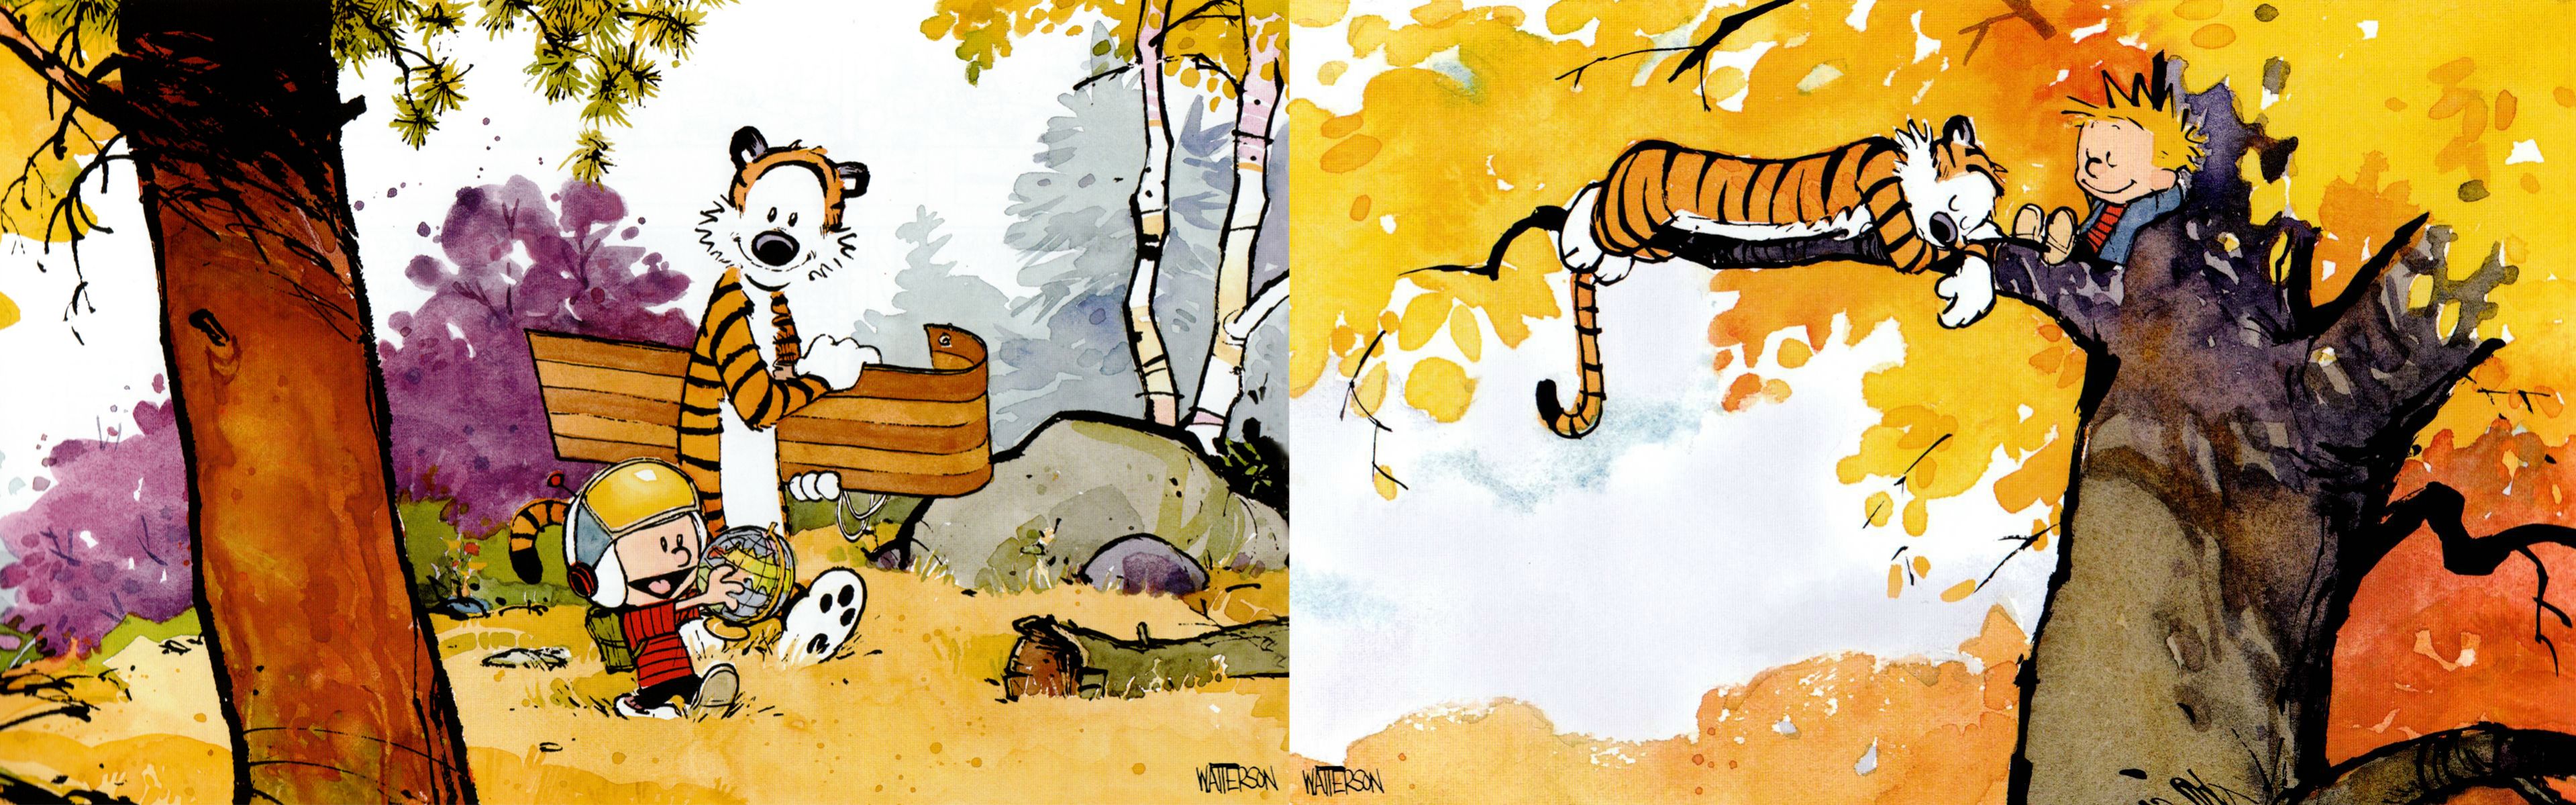 Dual Monitor Resolution The Creation Of Adam Wallpapers - Calvin And Hobbes Colour , HD Wallpaper & Backgrounds